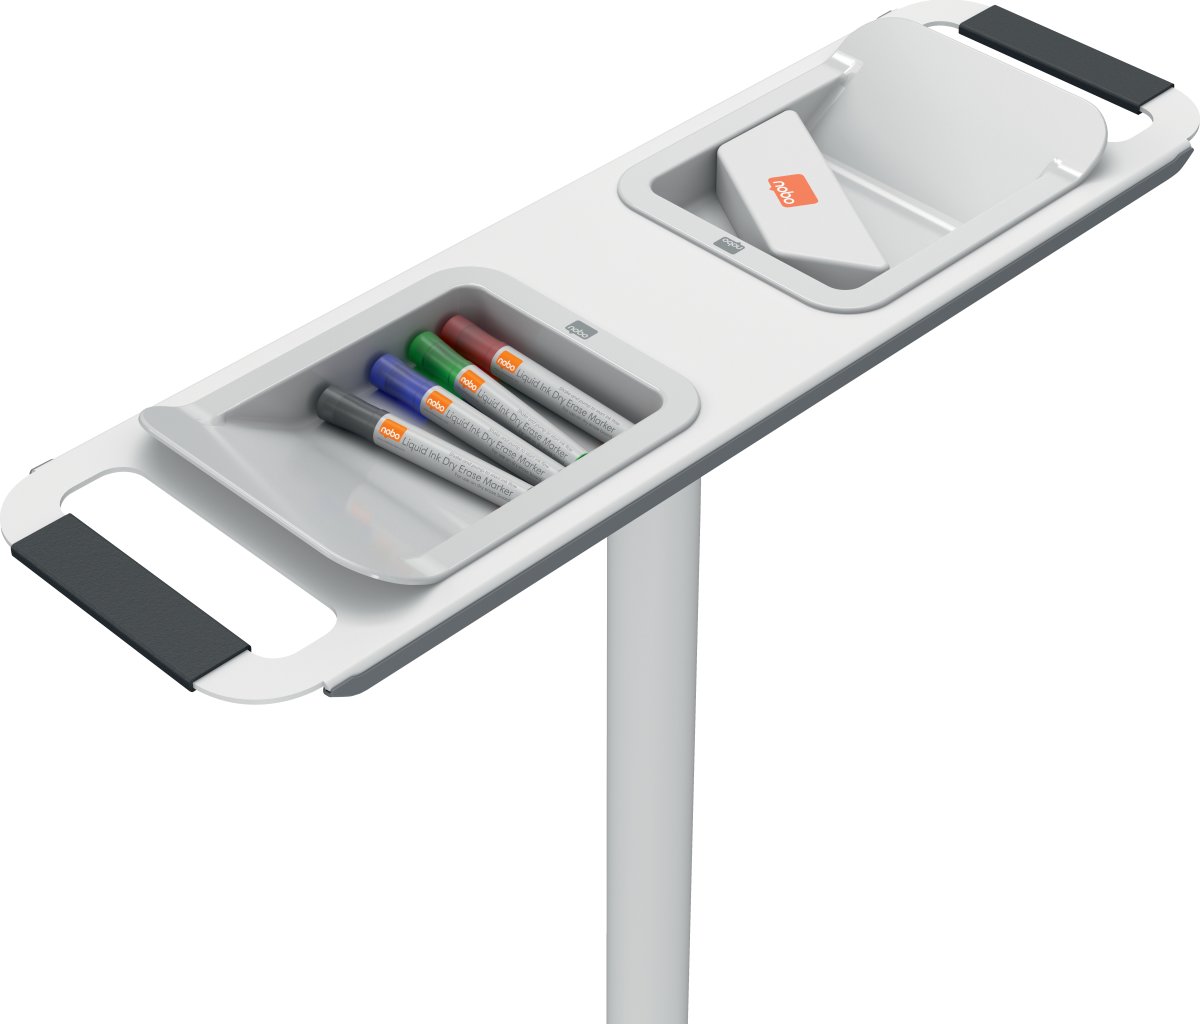 Nobo Mobile Move&Meet whiteboard-system, 180x90 cm